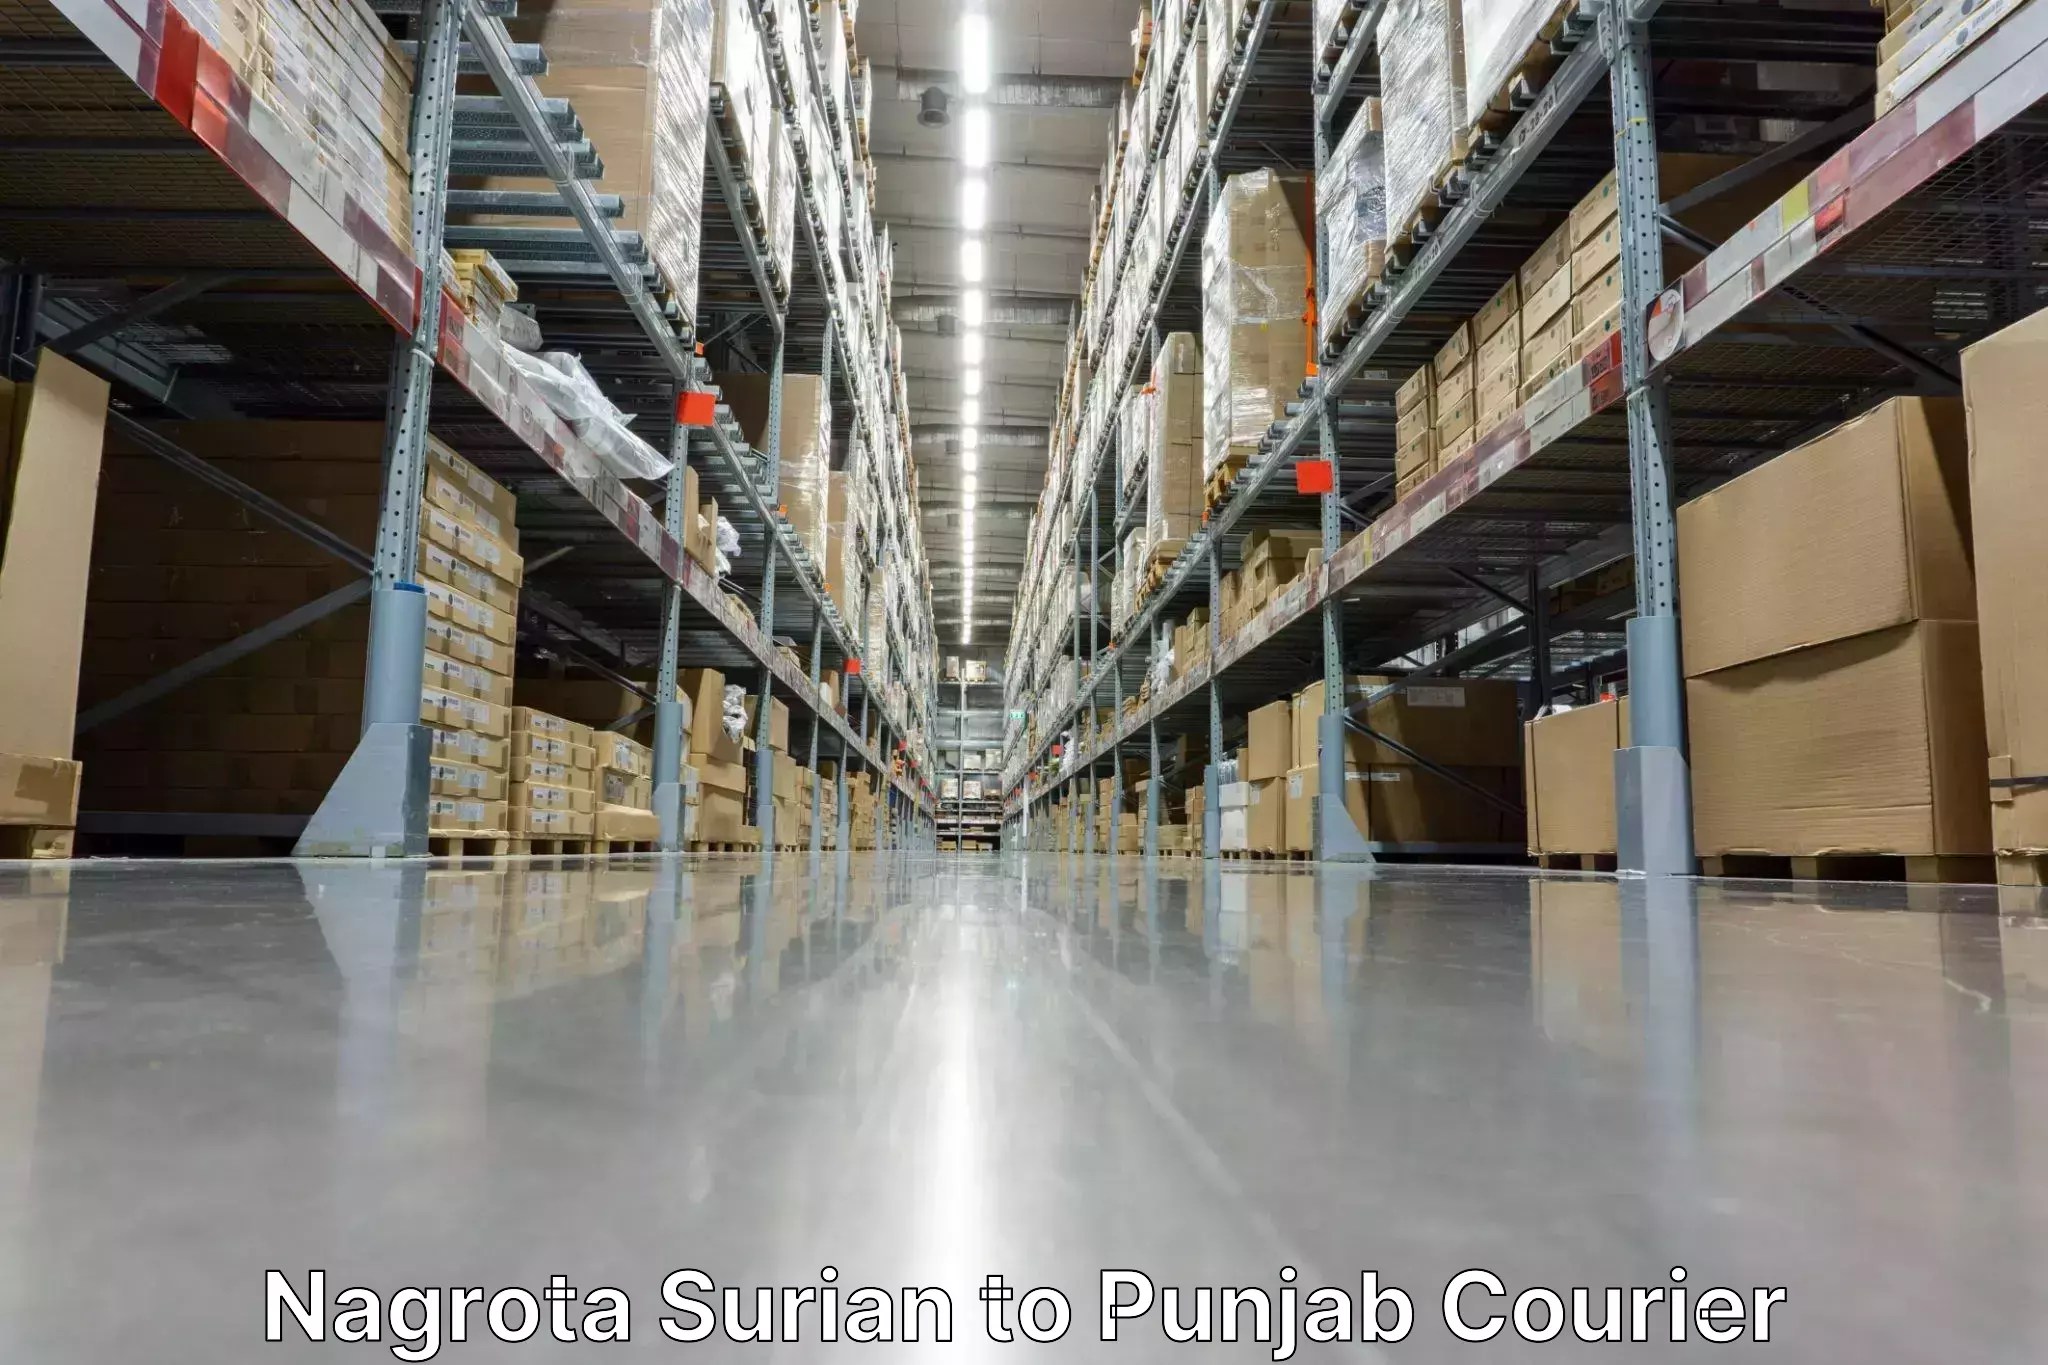 Next-day delivery options Nagrota Surian to Punjab